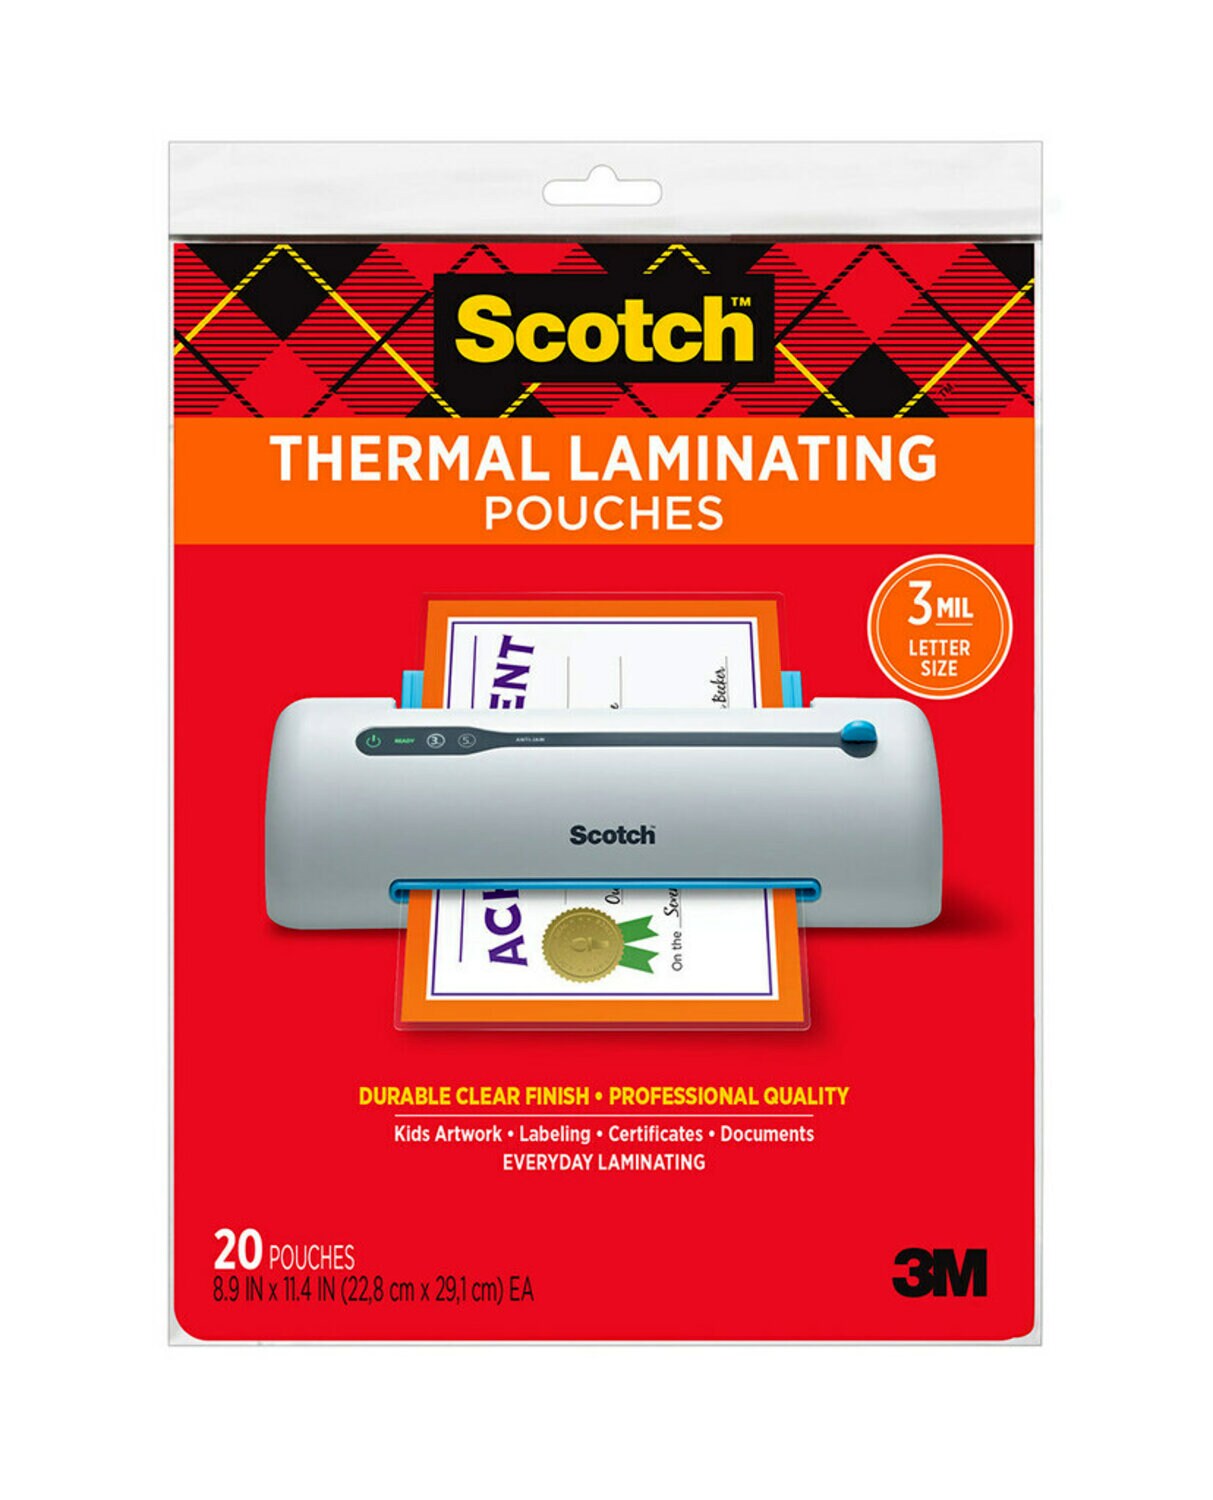 7100264915 - Scotch Thermal Pouches TP3854-20 Letter size